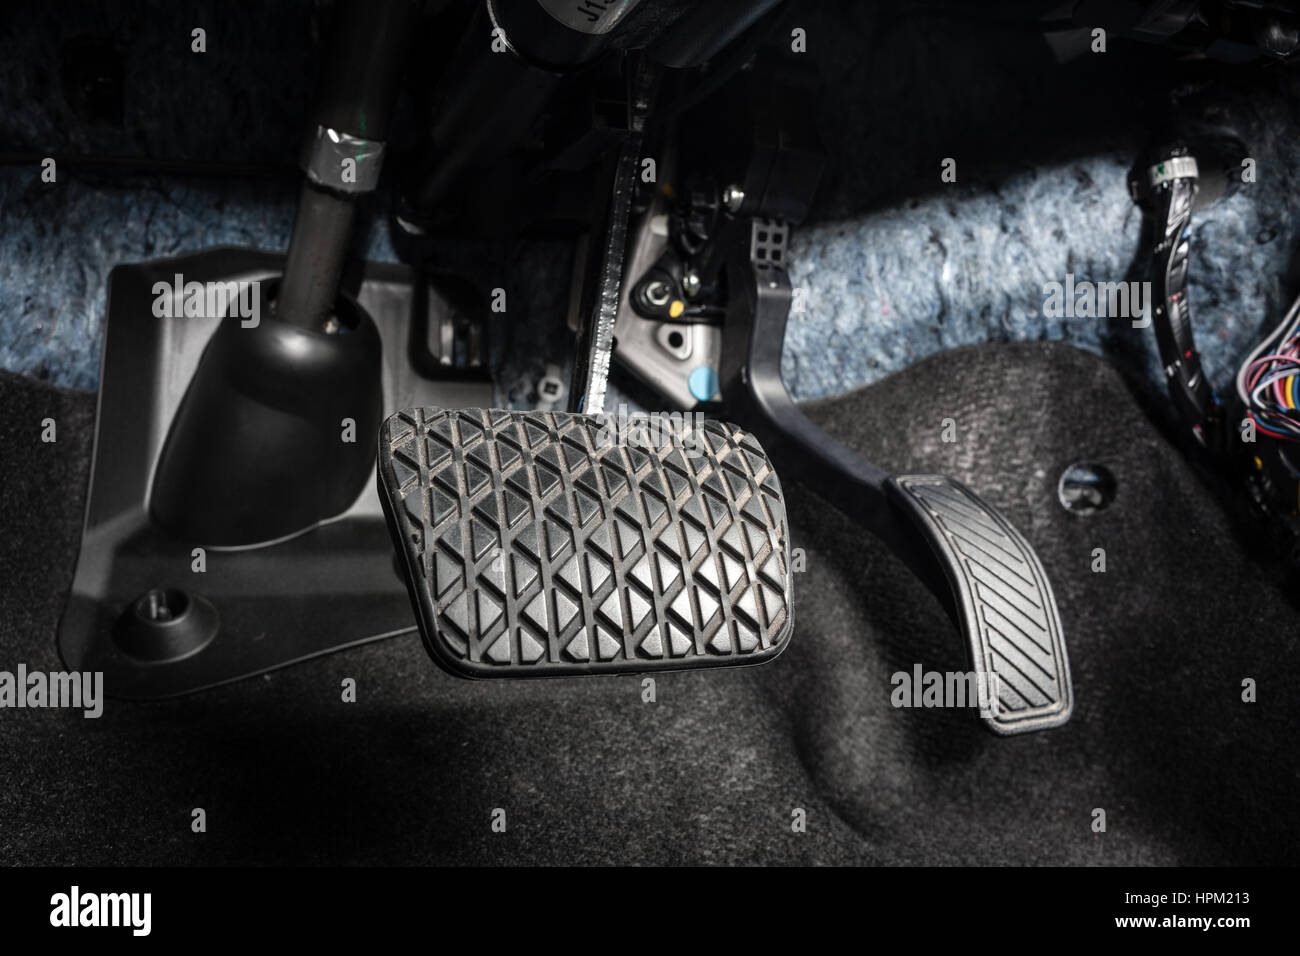 Car Pedals (clutch, Brake And Gas/accelerator) Stock Photo